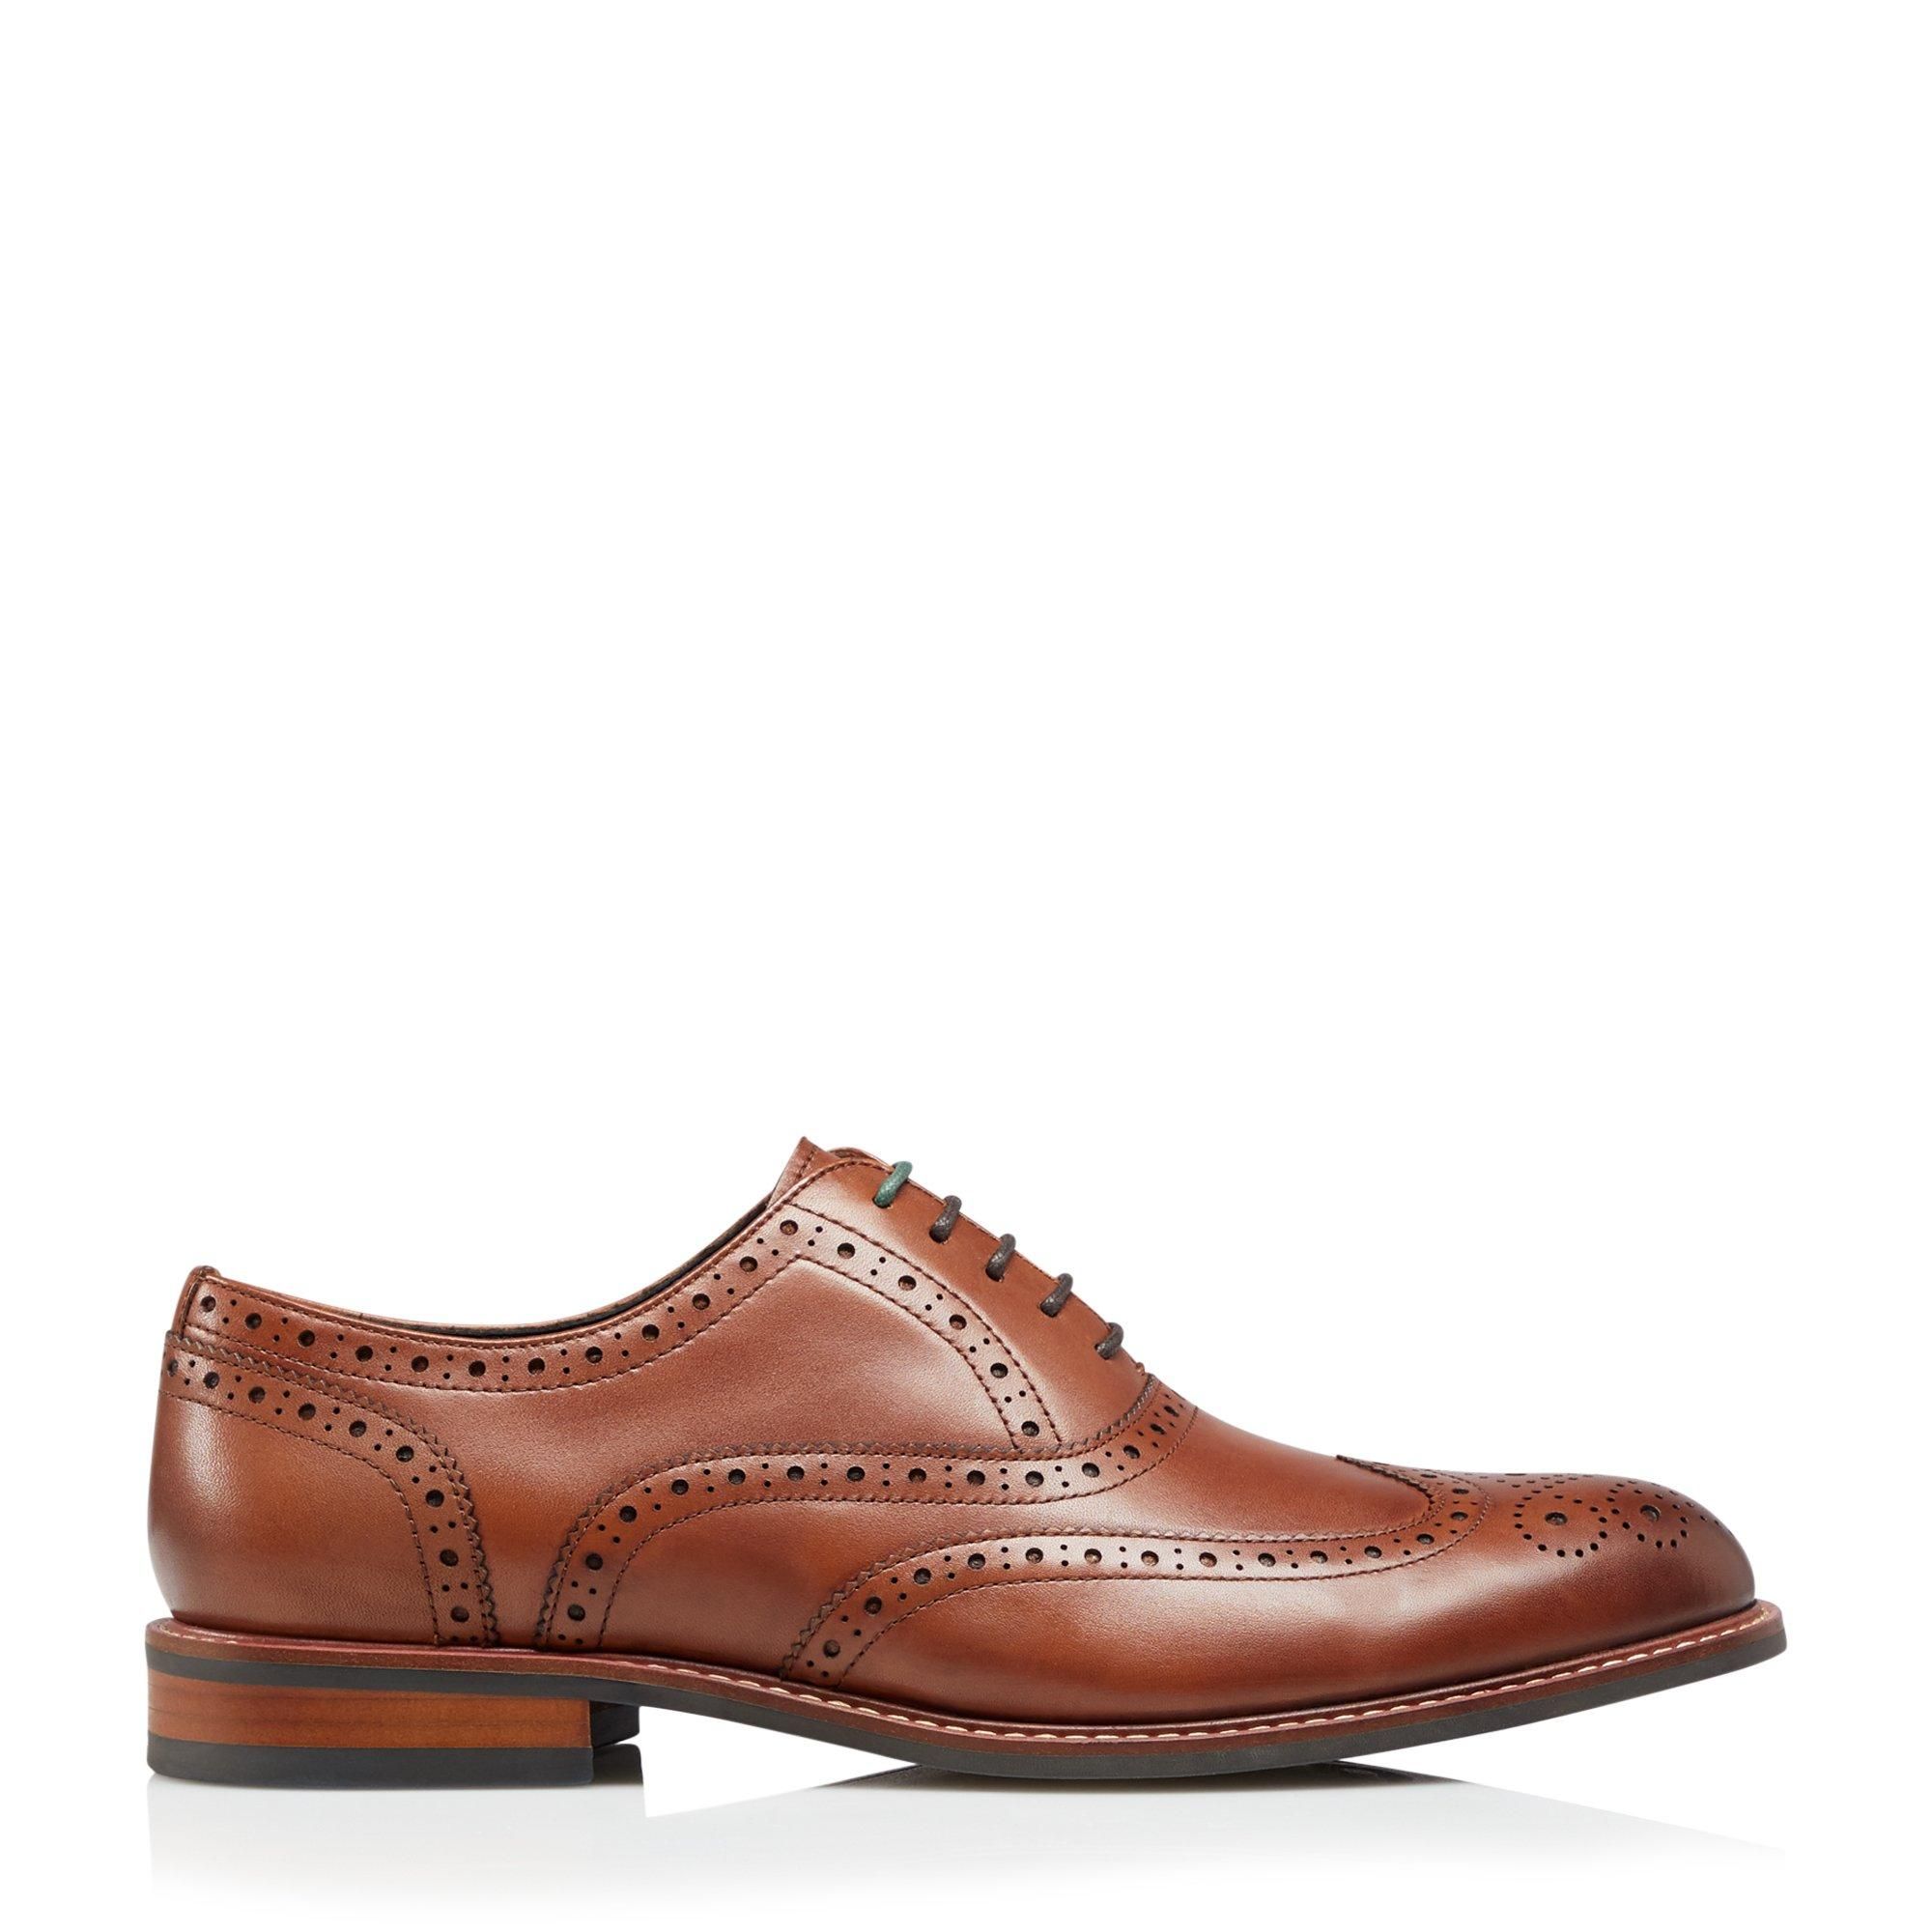 Upgrade your formal look with the wide fit Pollodium shoe. Showcasing a striped sole, round toe and secure lace closure. It's complete with traditional brogue punching and wingtip details.